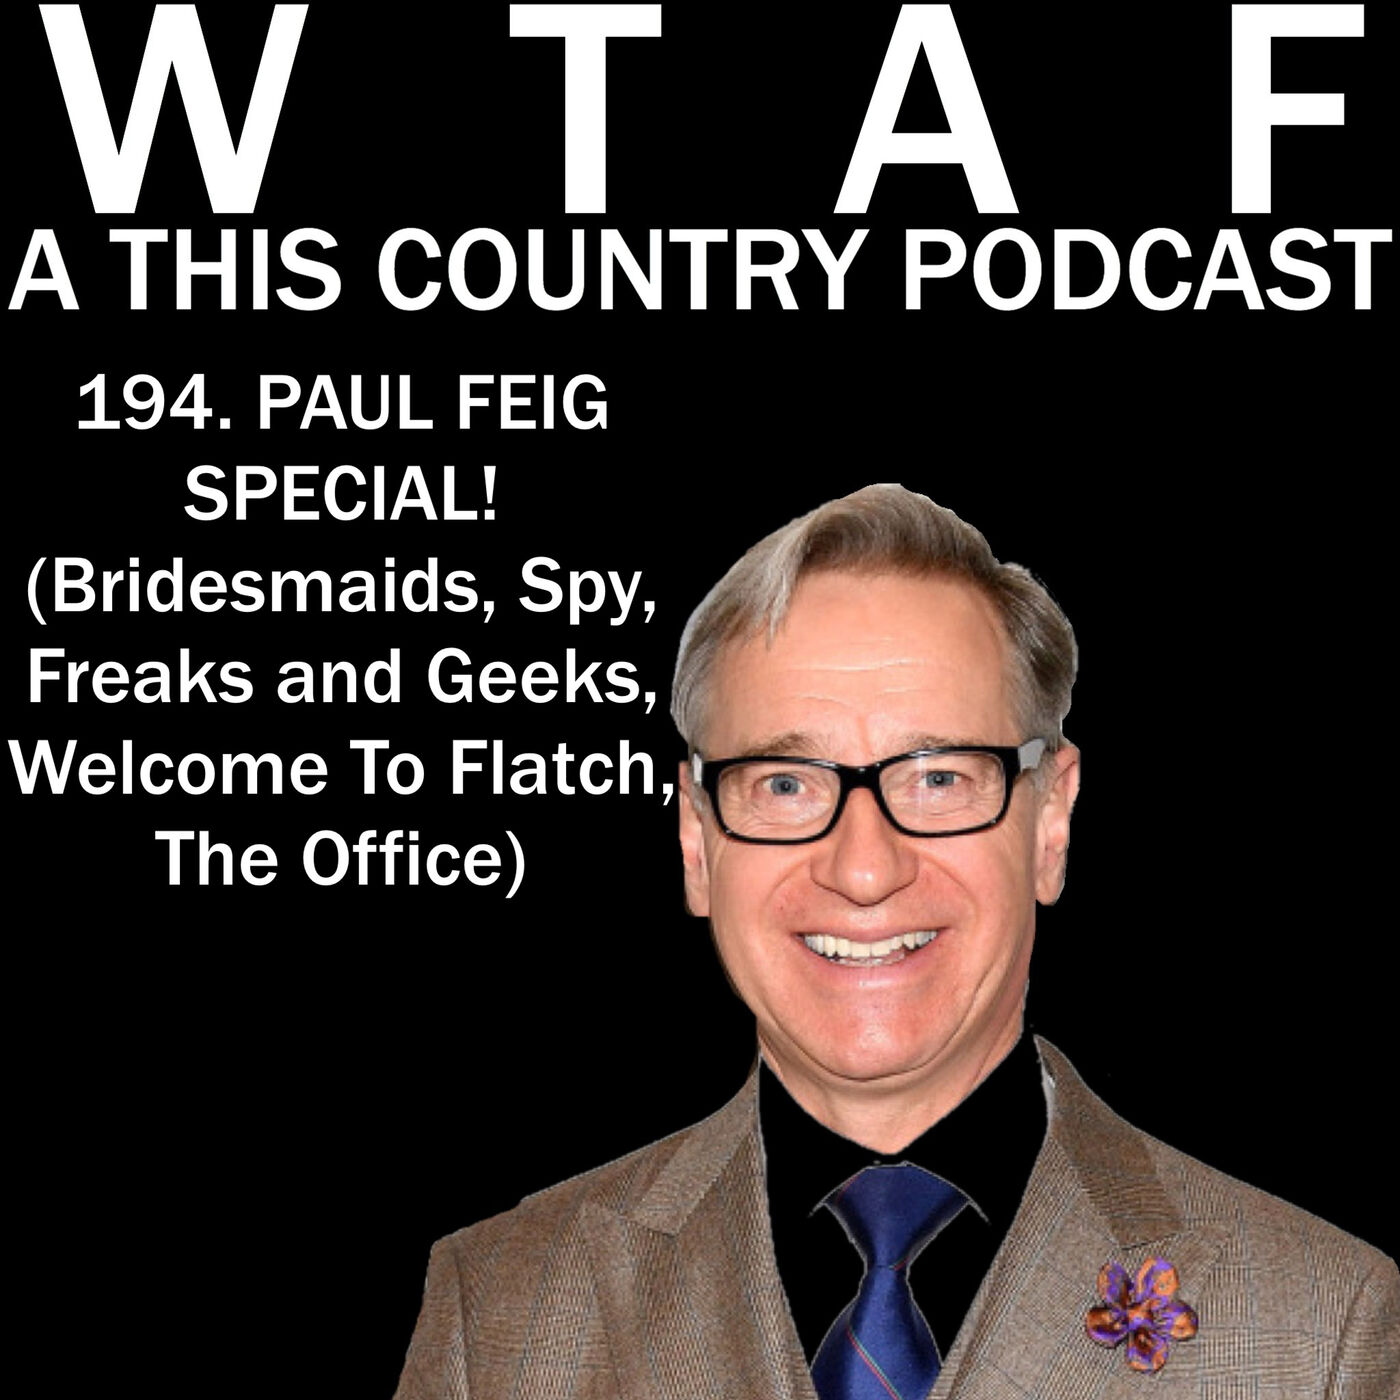 194. Paul Feig Special! (Freaks and Geeks, Bridesmaids, Spy, US Office, Welcome To Flatch)